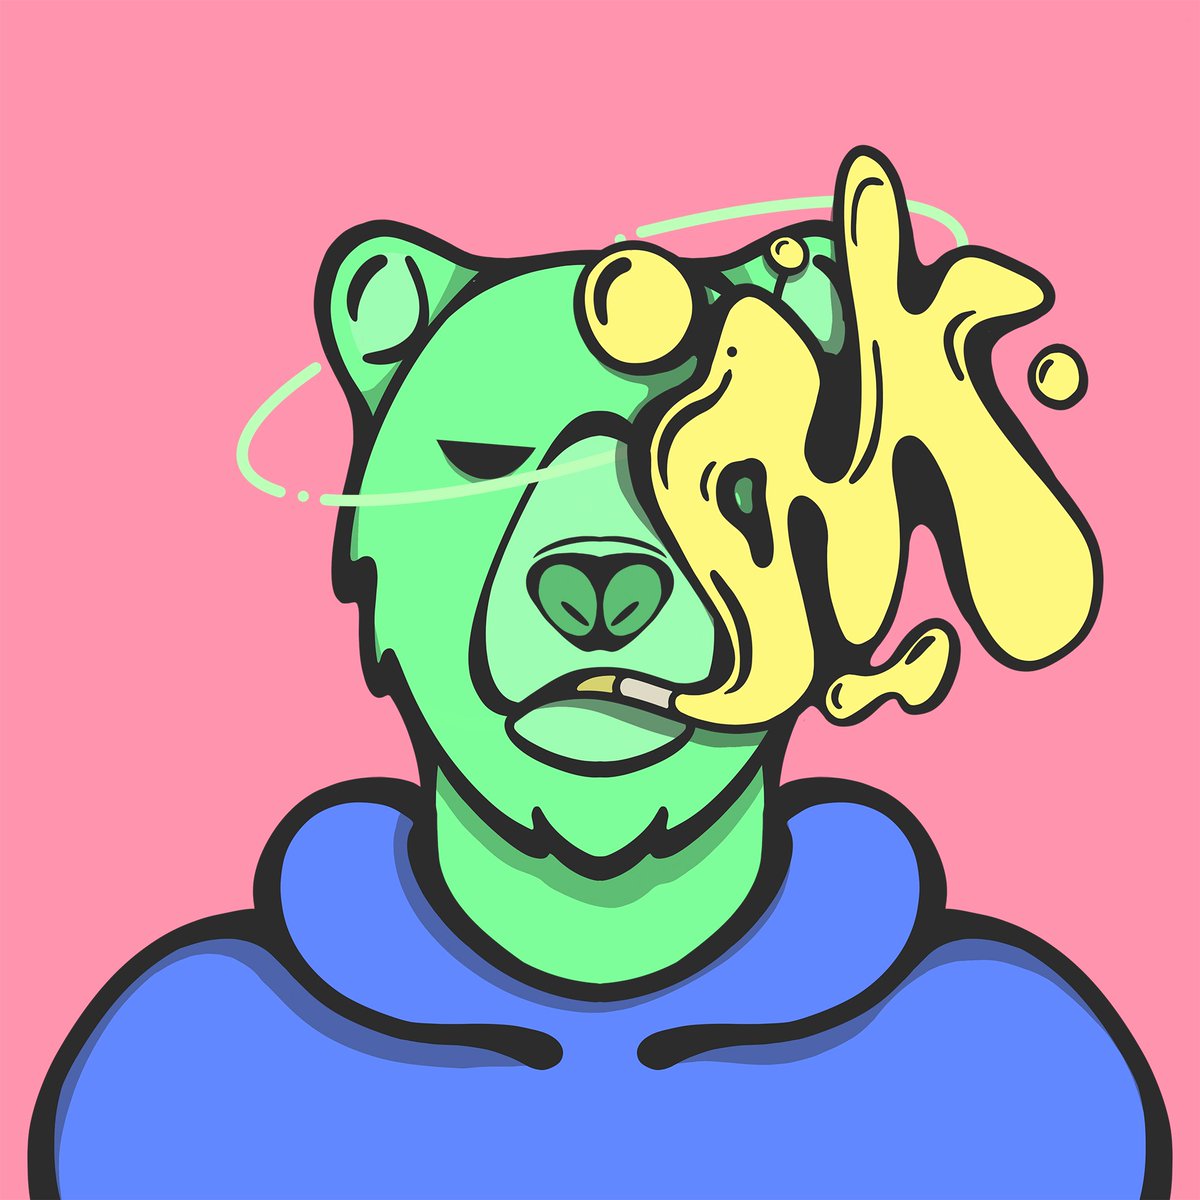 Just minted this @MoneyBears_ inspired by @SolanaMoneyBoys art. 👀🔥🔥🔥💵🐻
#Solana #NFT #Crypto